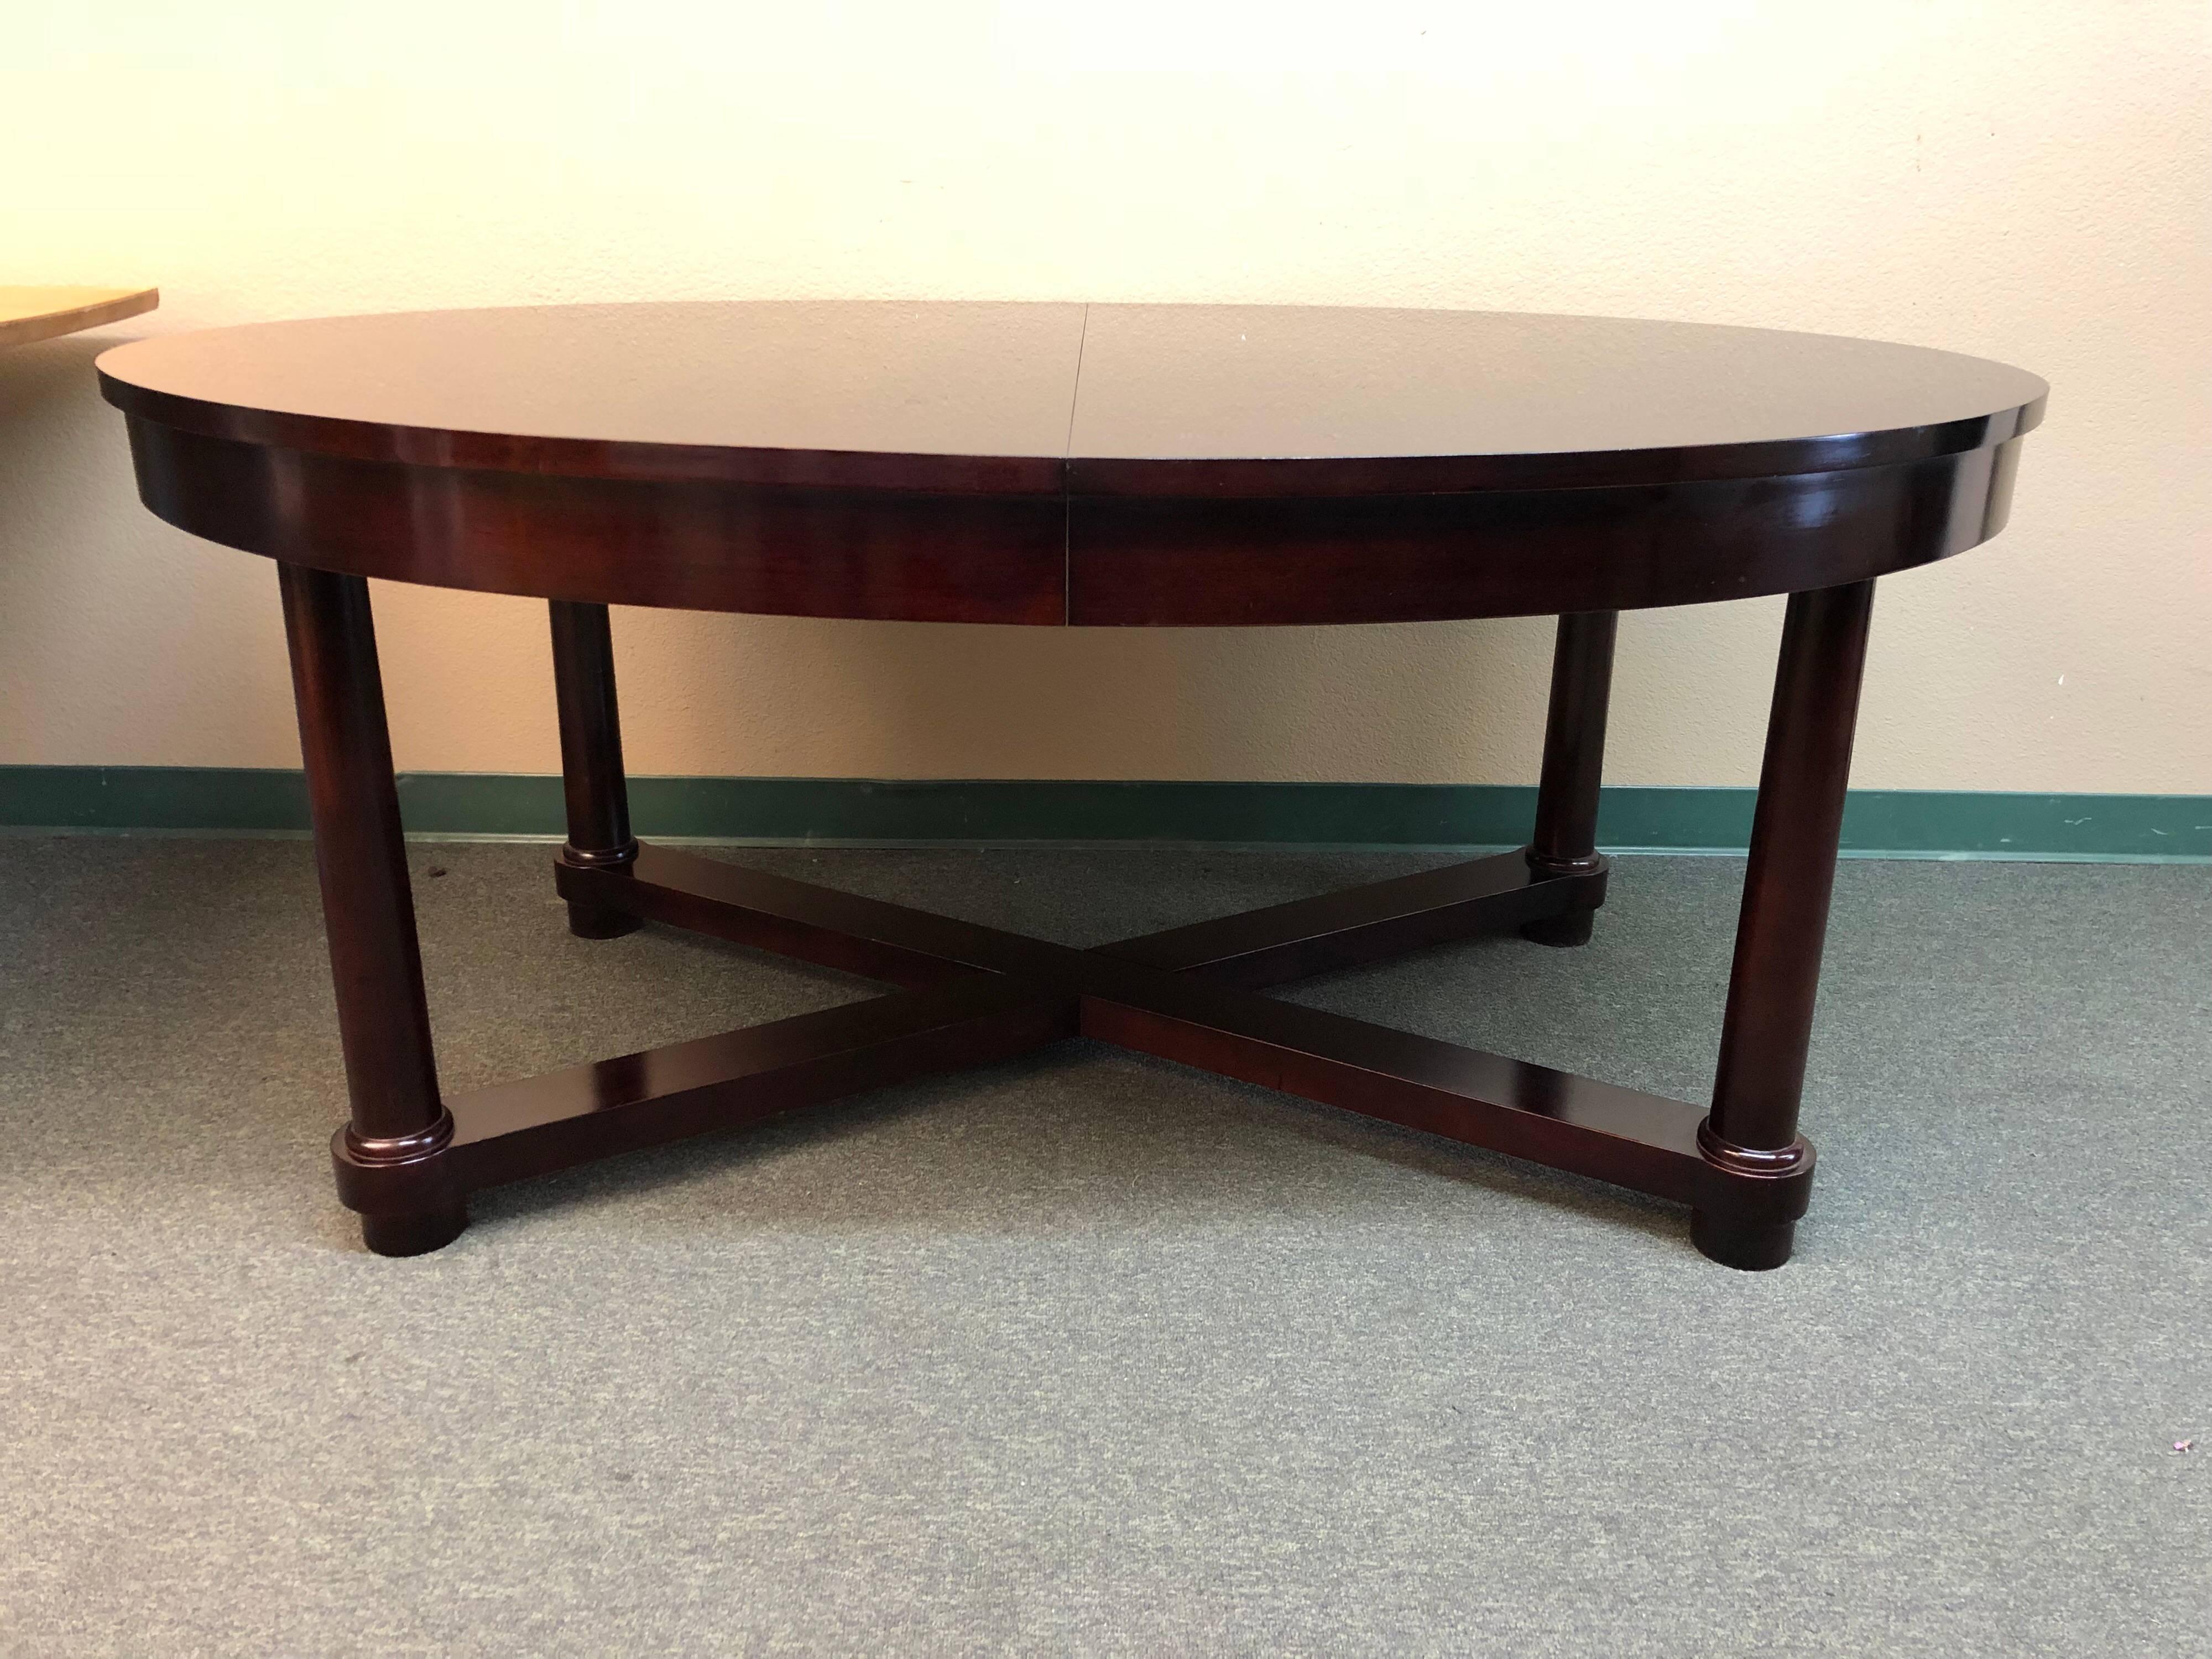 A Barbara Barry dining table. The table was produced by Baker furniture Company. The Mahogany oval dining table in the style of the 19th century English dining table, paired down to a more elementary form, the extended oval dining table embodies the